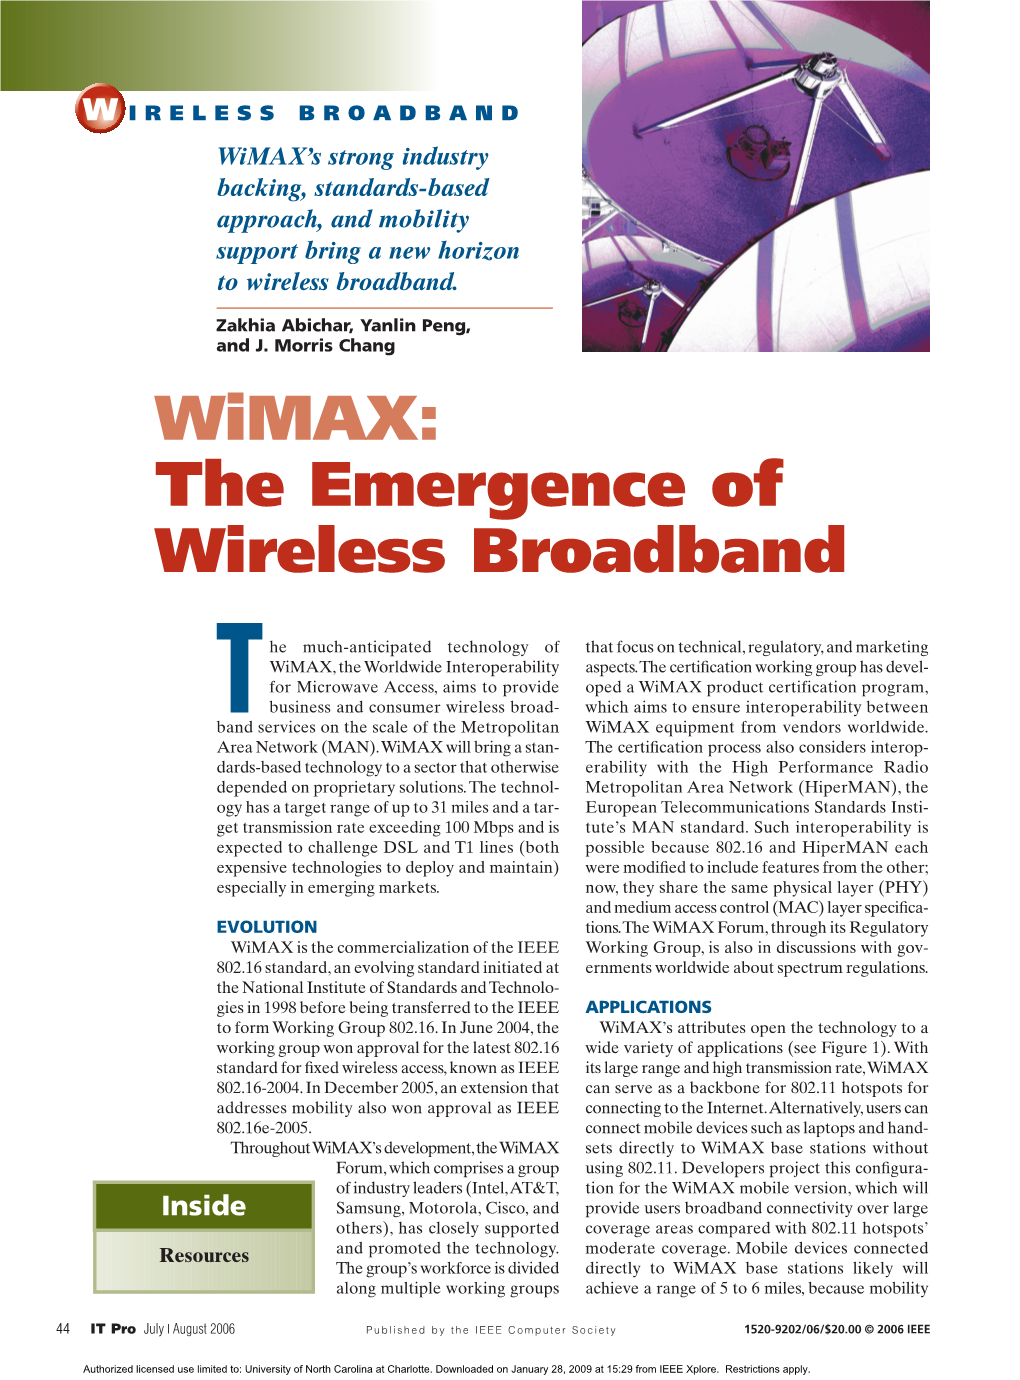 Wimax’S Strong Industry Backing, Standards-Based Approach, and Mobility Support Bring a New Horizon to Wireless Broadband